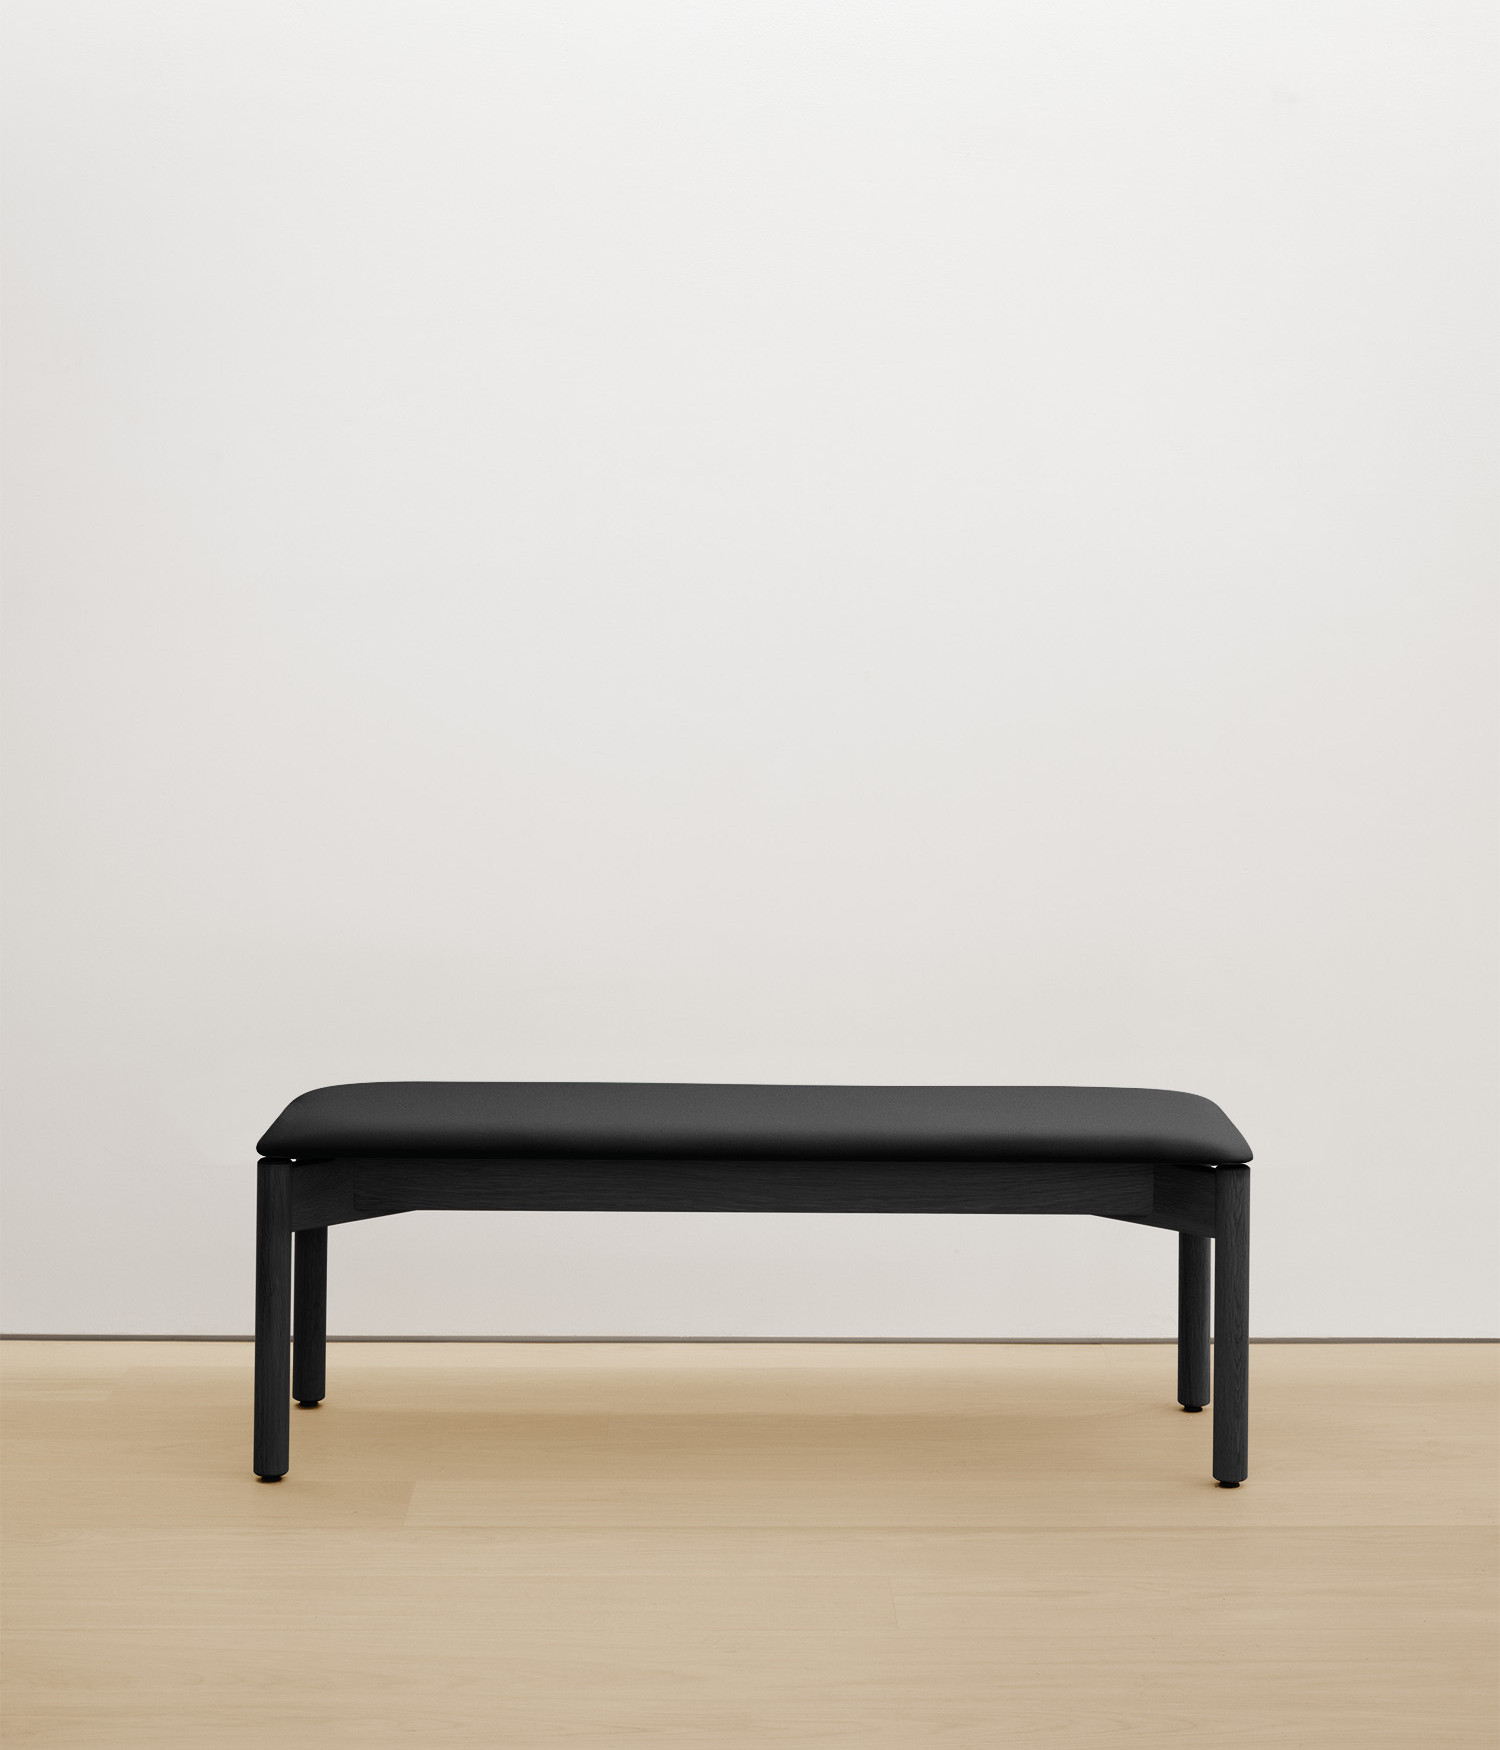 black-stained-oak bench with black upholstered seat